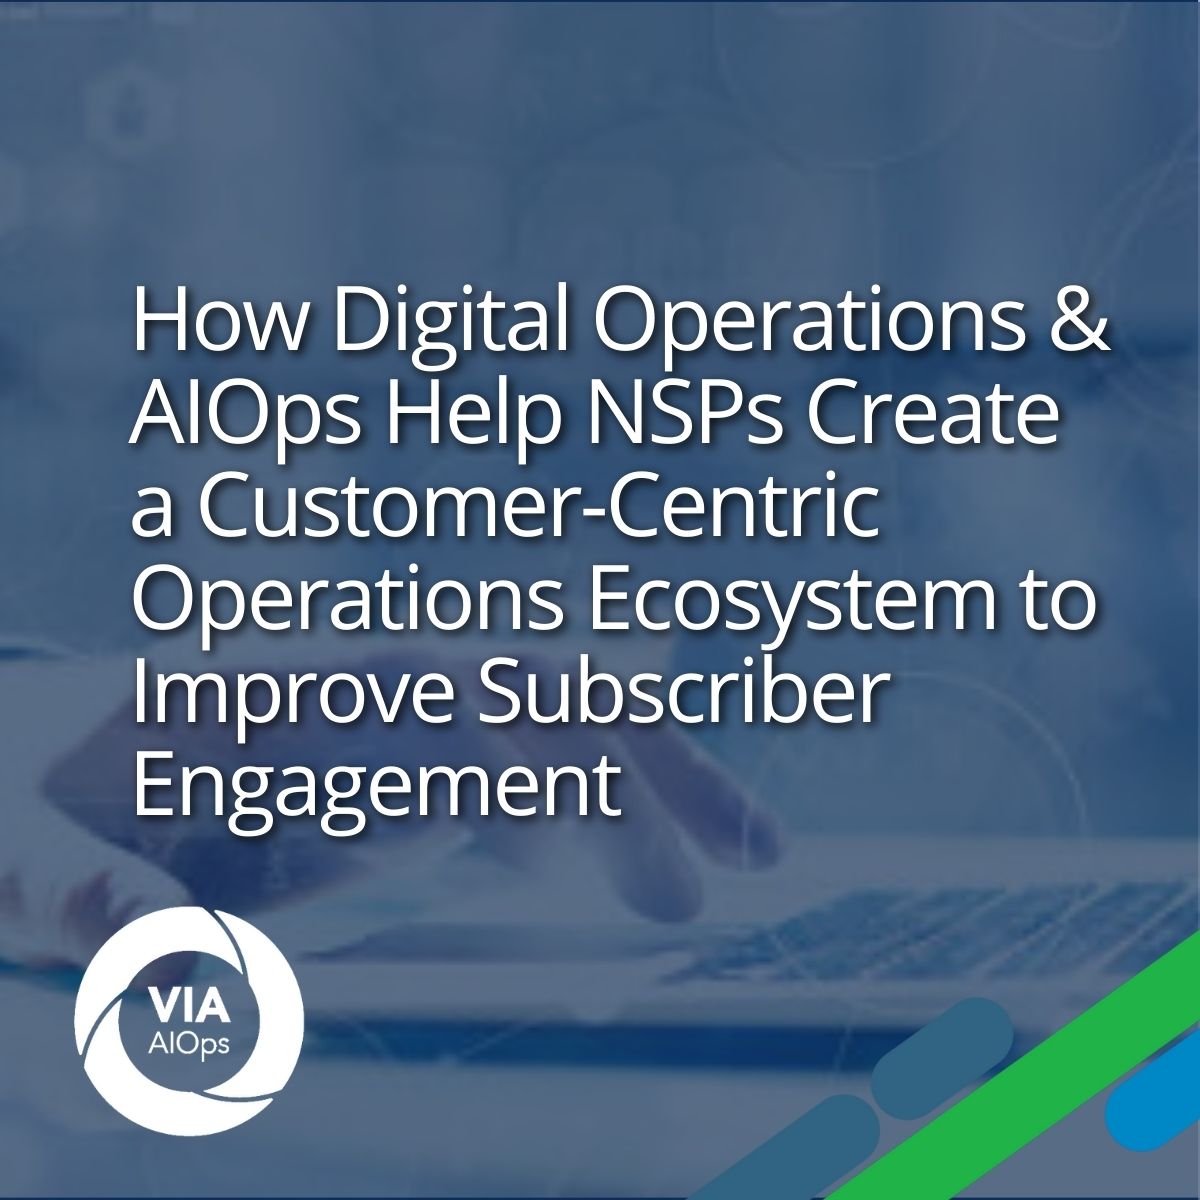 How to improve subscriber engangement for operations ecosystem